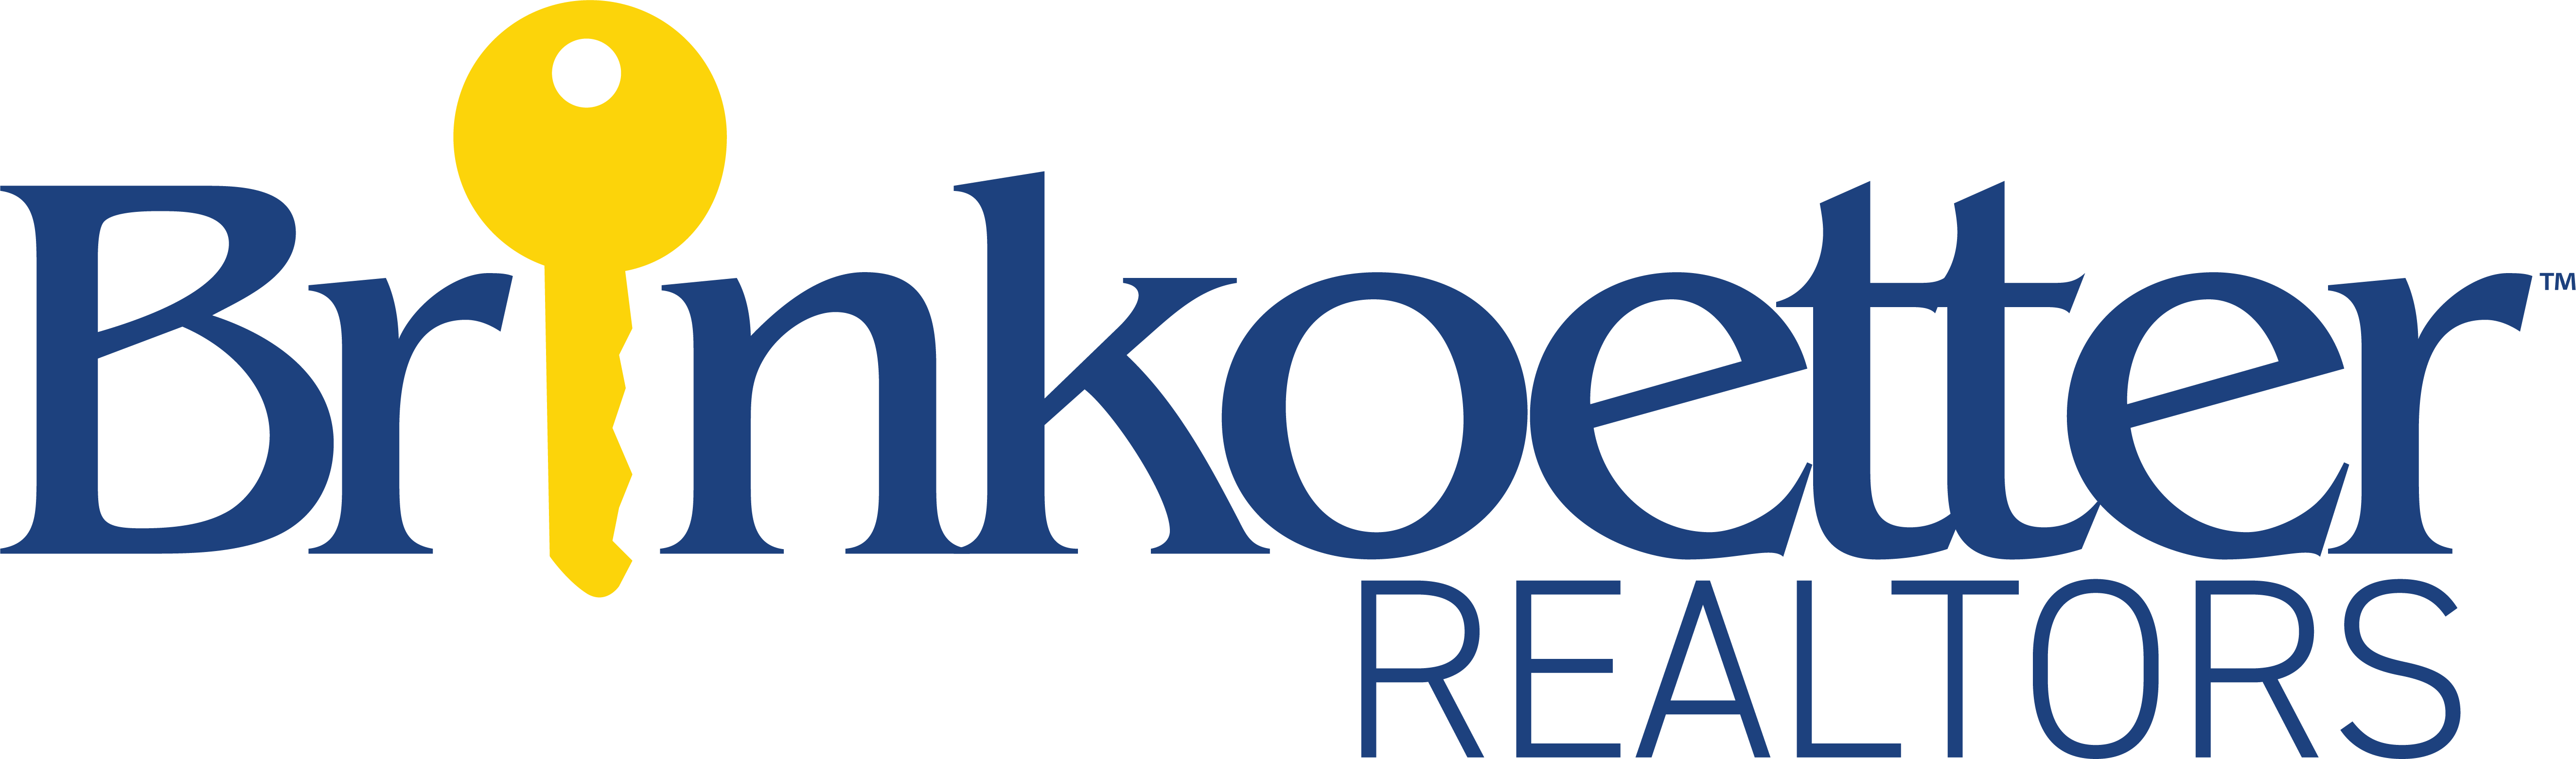 To find careers at Brinkoetter Realtors, click here.